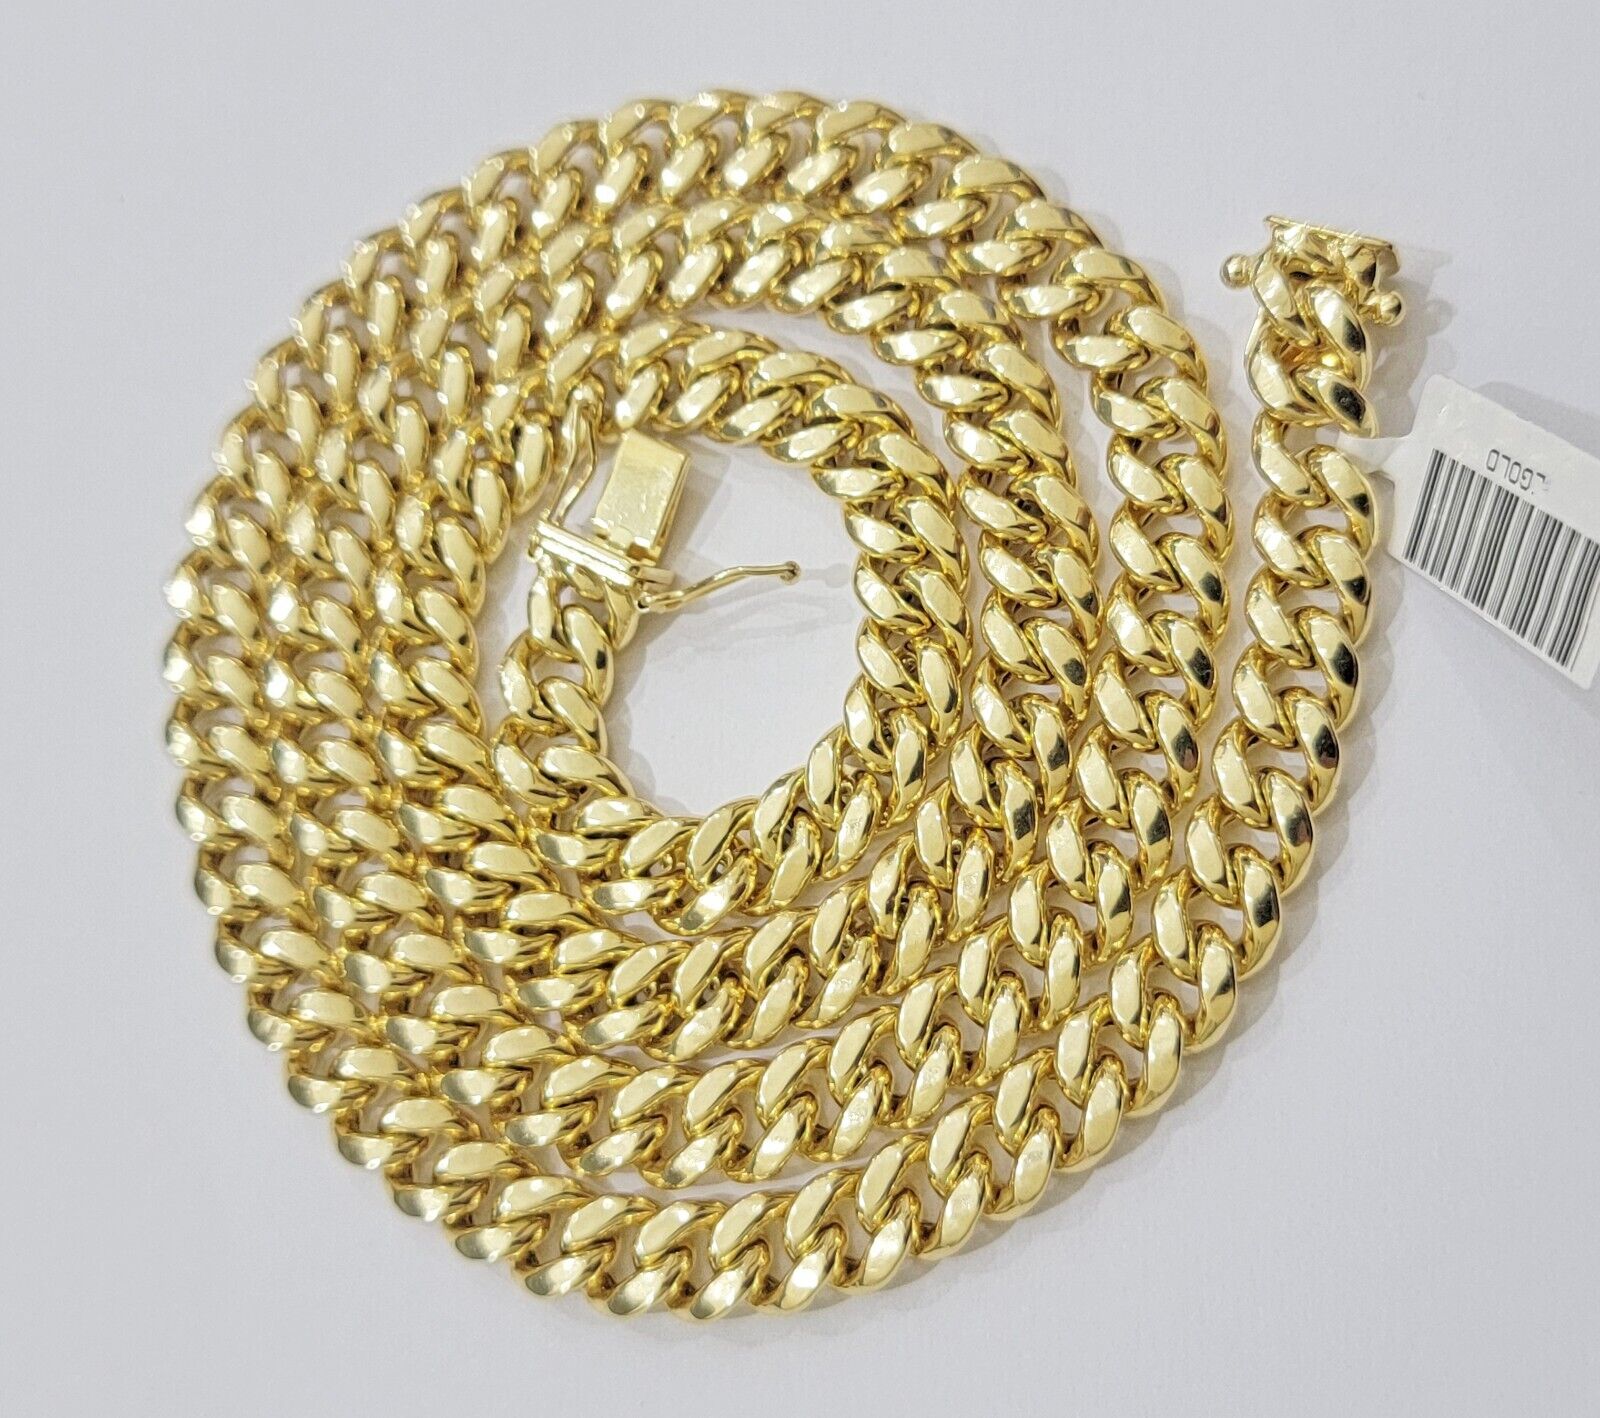 Miami Cuban Link Chain 20 Inch Necklace REAL 10k Yellow Gold 8mm Mens Women 10KT